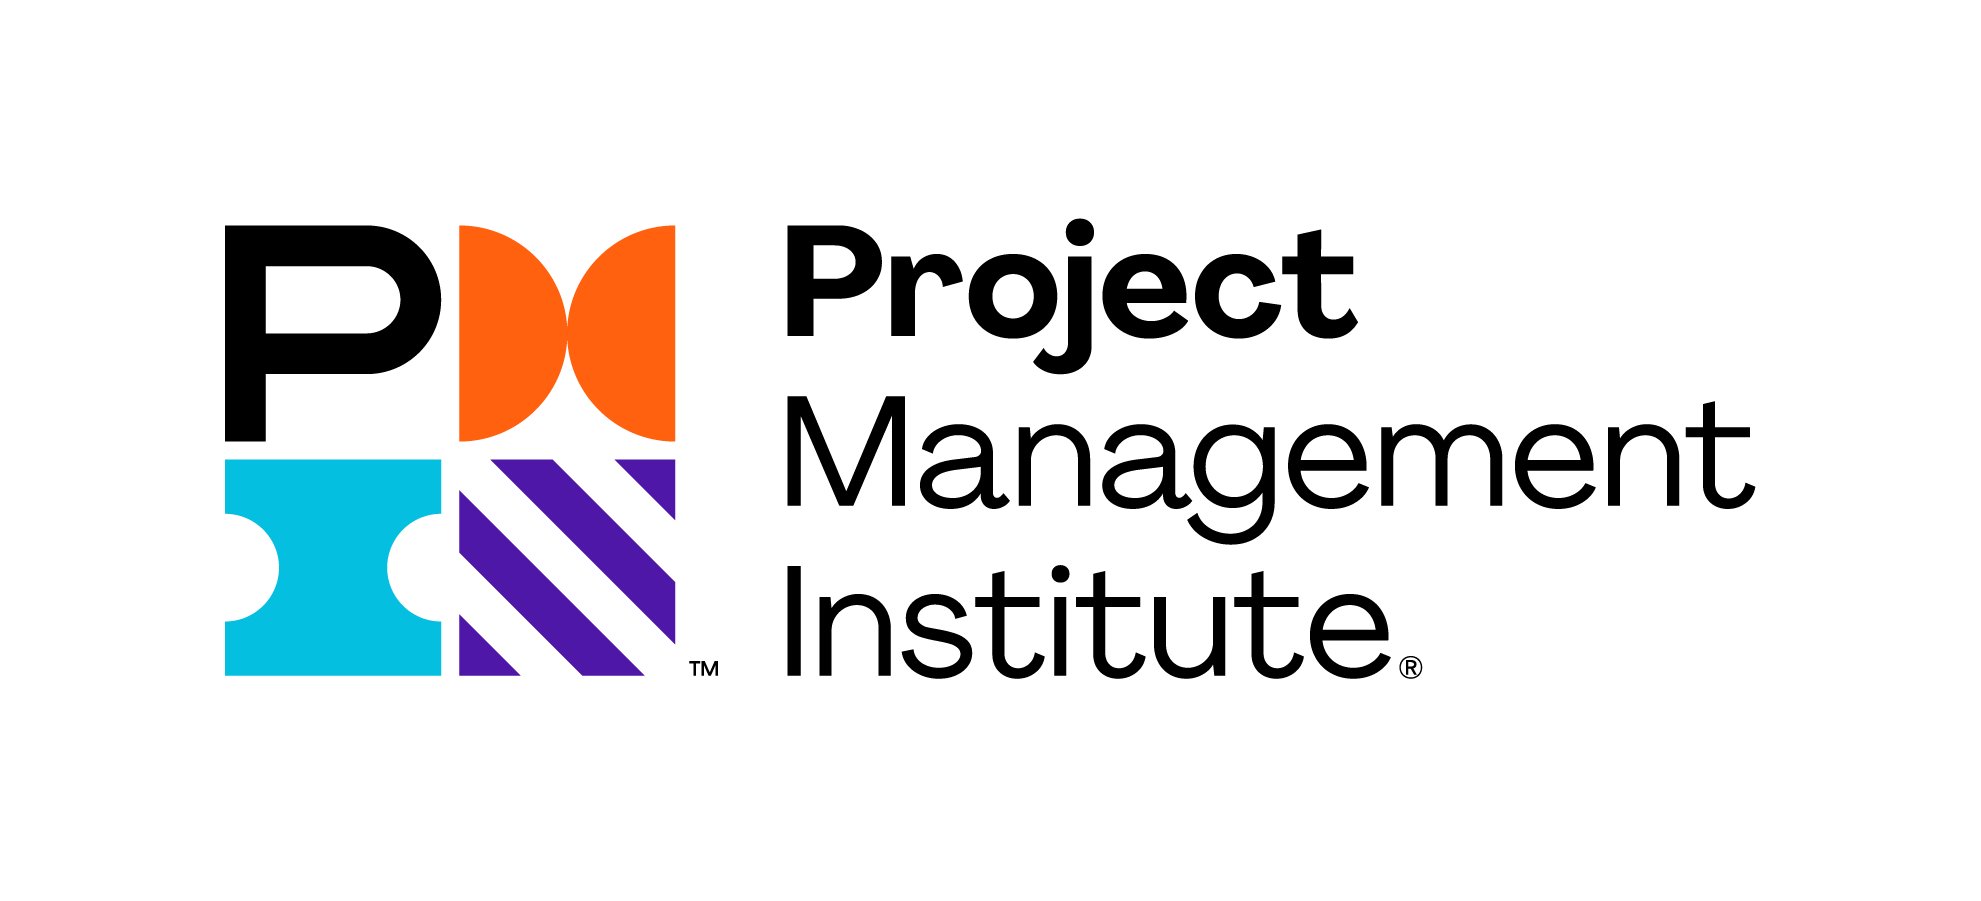 Attributes and Strategies of the World’s Leading Project Management Offices